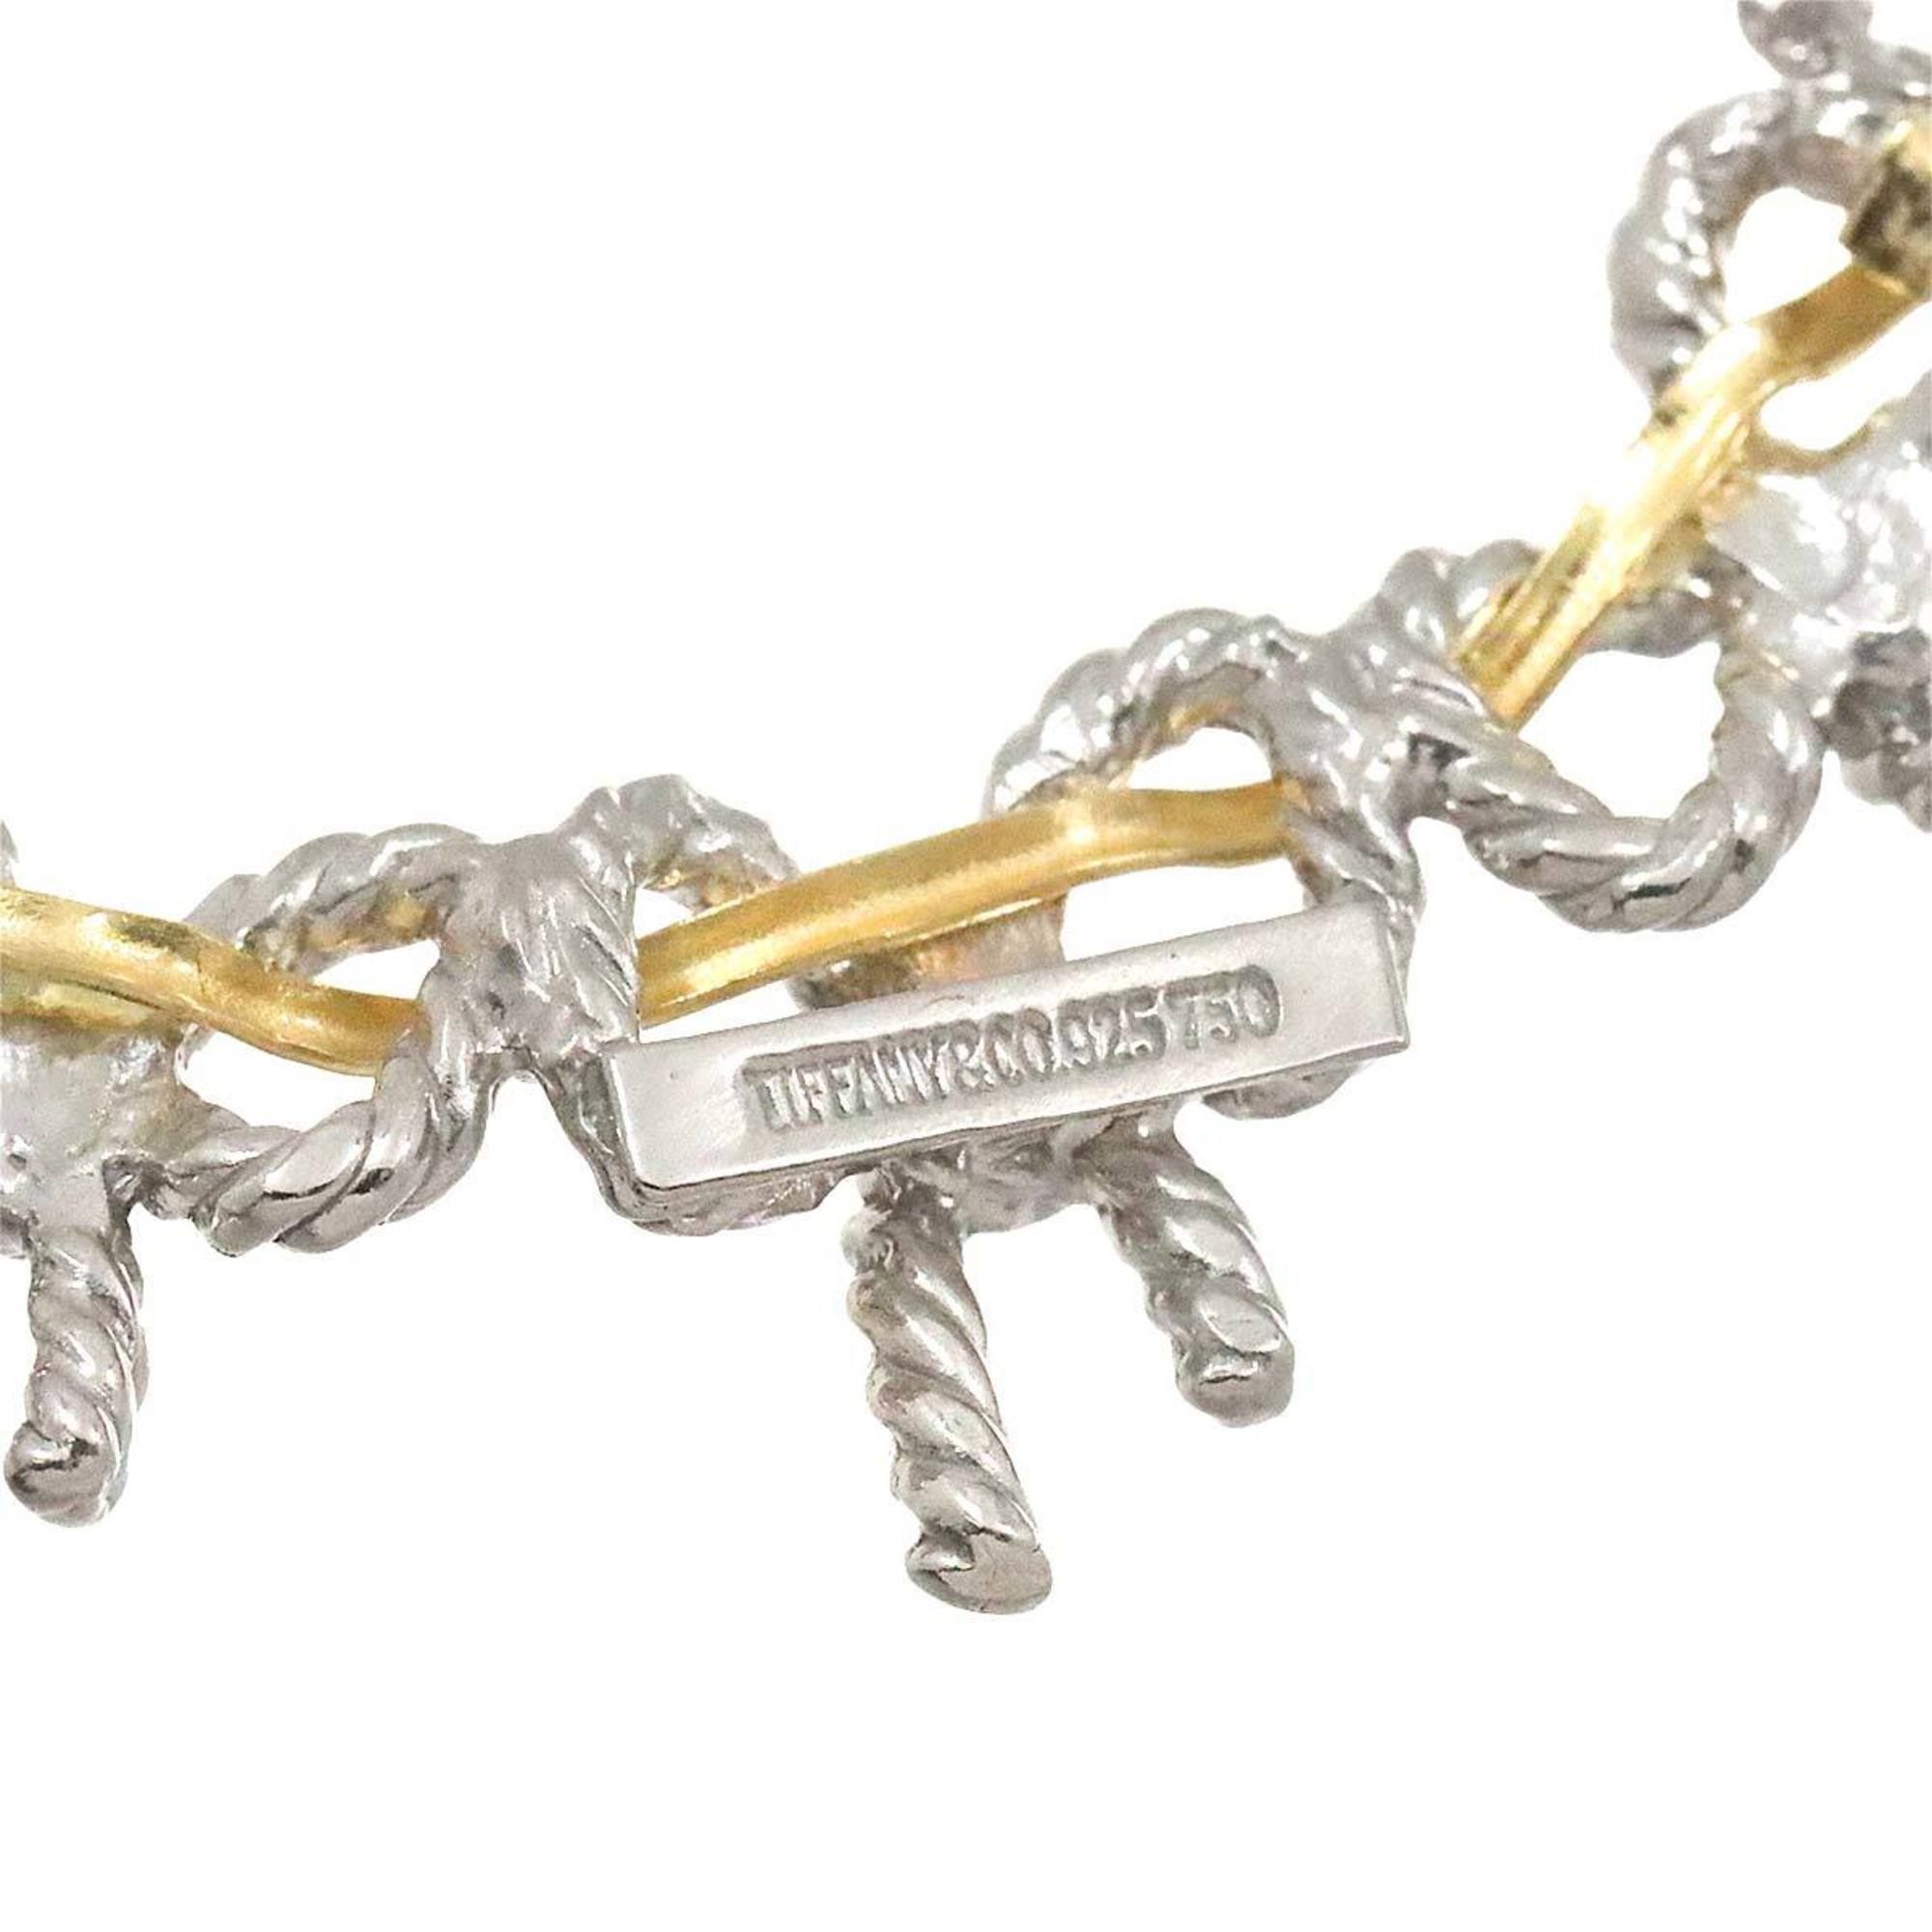 Tiffany & Co. Twisted Triple Ribbon Necklace 47cm SV Silver 925 K18 YG Yellow Gold 750